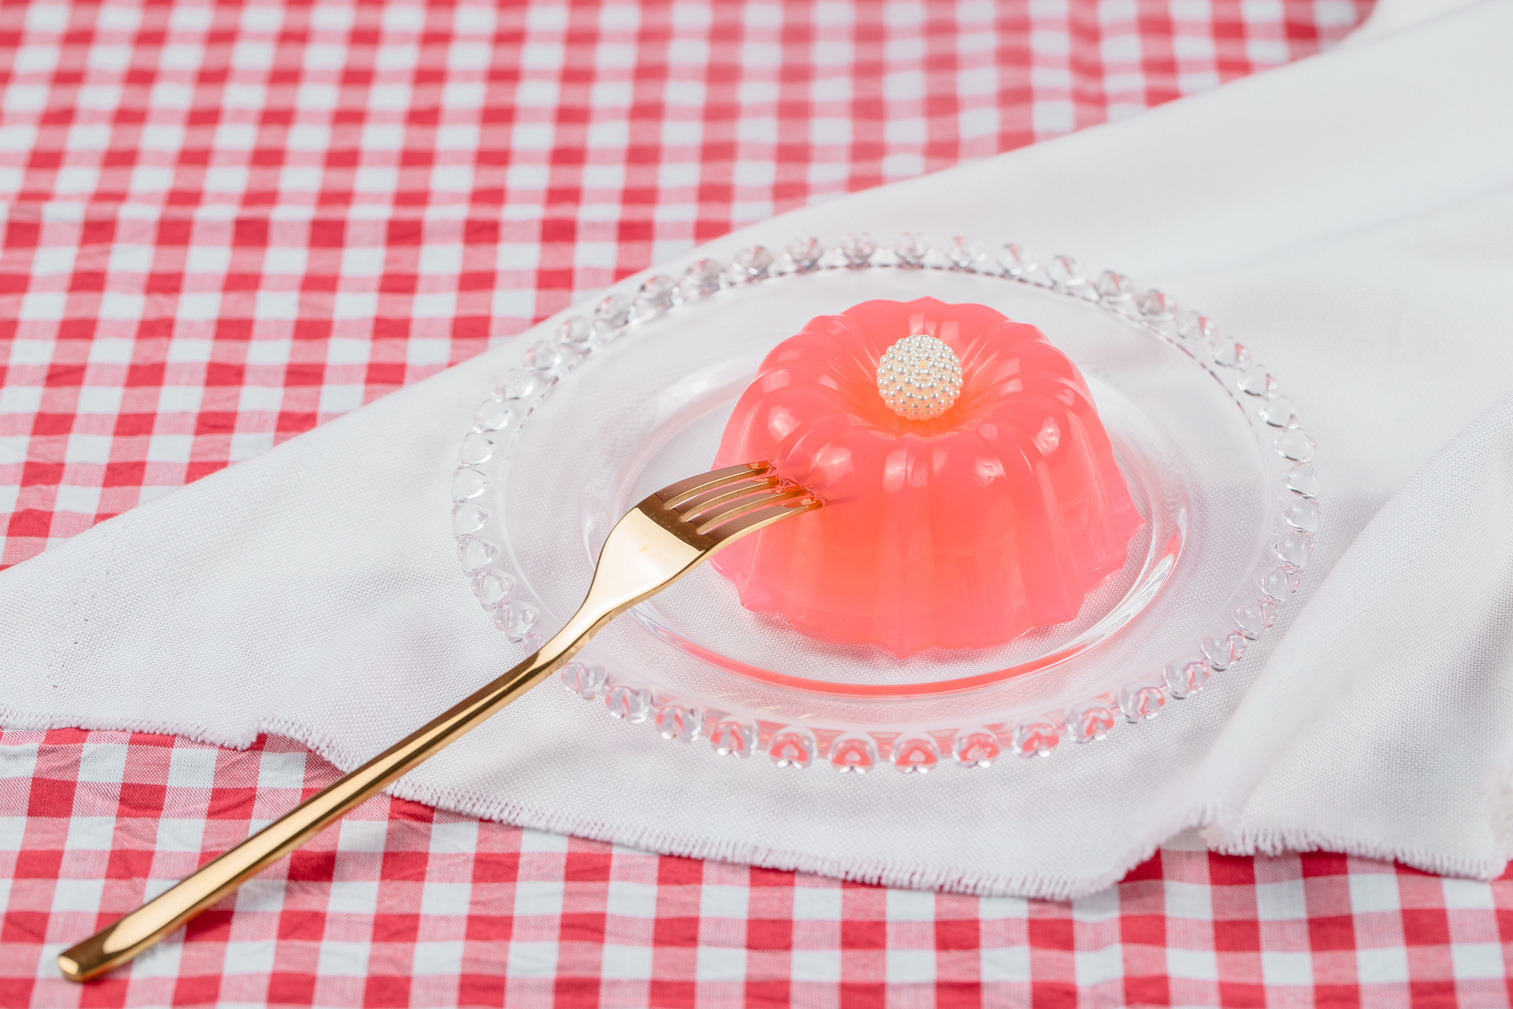 Mini Jelly Cake with Accessories